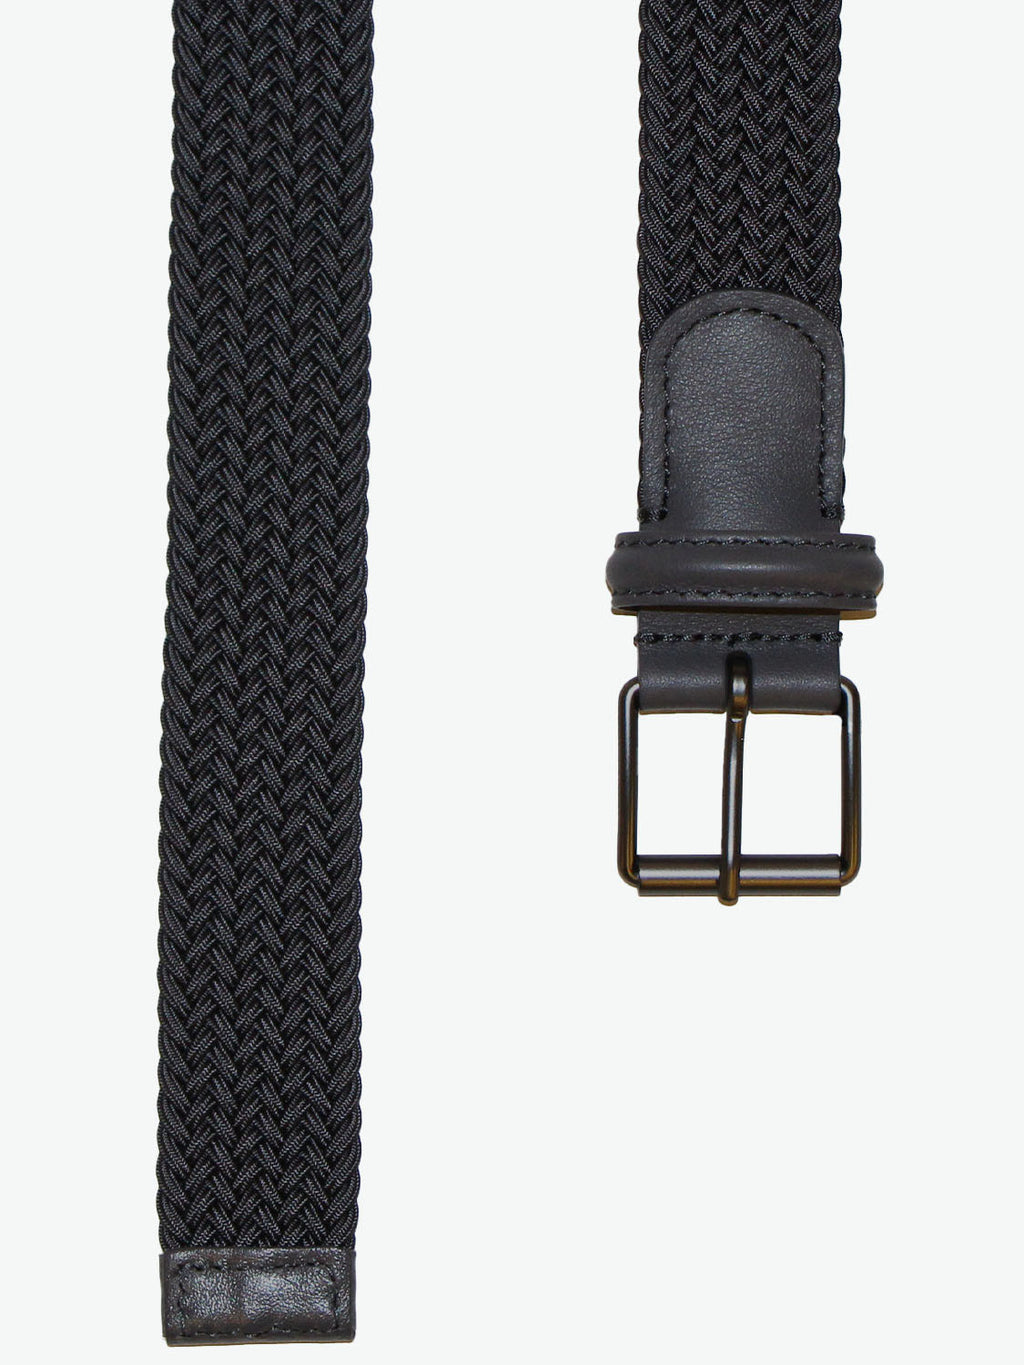 Anderson's Belt Leather-Trimmed Woven Slate Blue